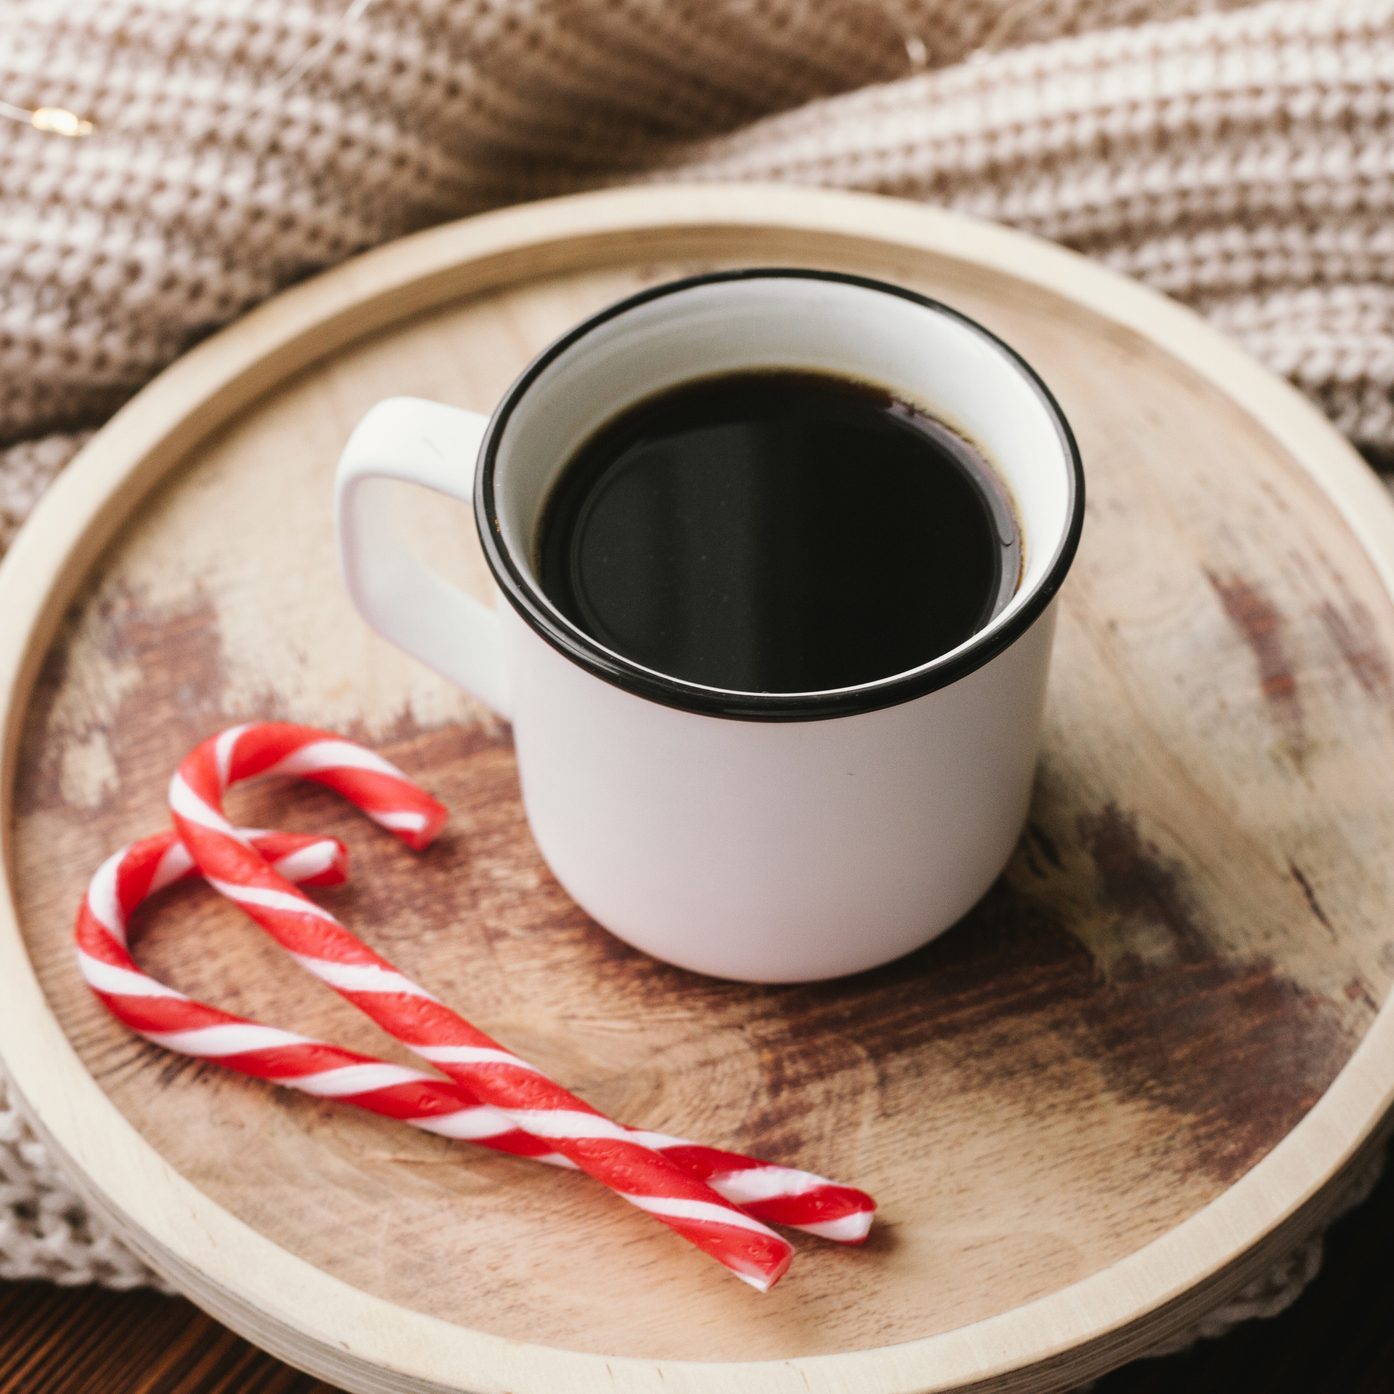 White cup of coffee on wooden table, beige knitted fabric and red candy canes. Christmas cozy stil life.